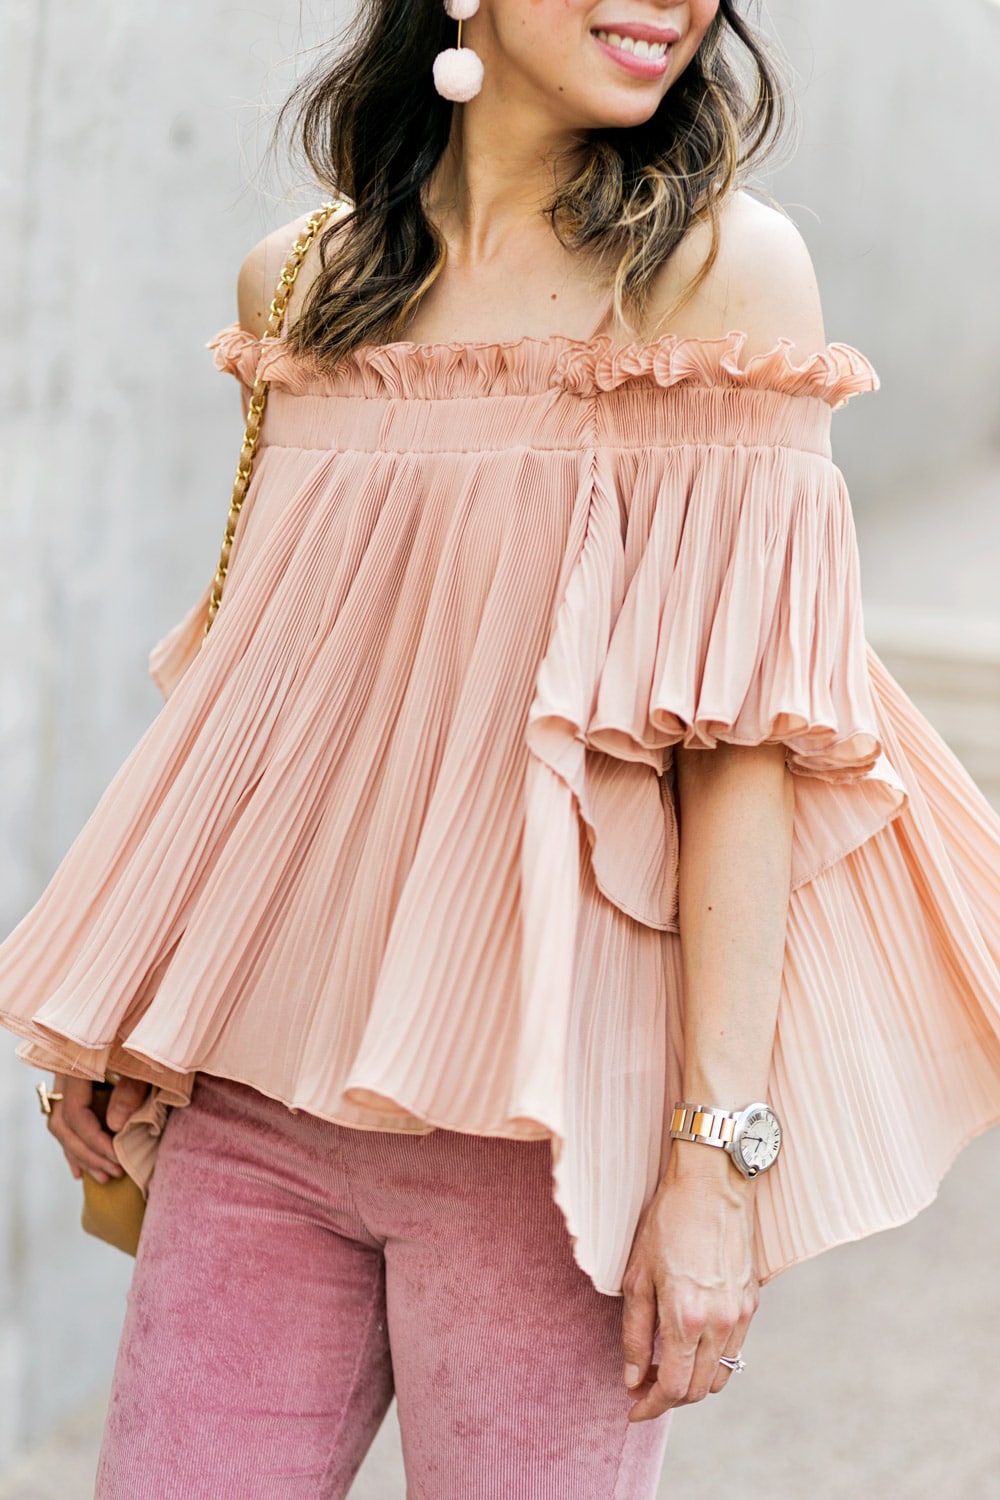 baublebar bahama pink pom pm earrings with endless rose pink pleated off the shoulder top, spring outfit idea 